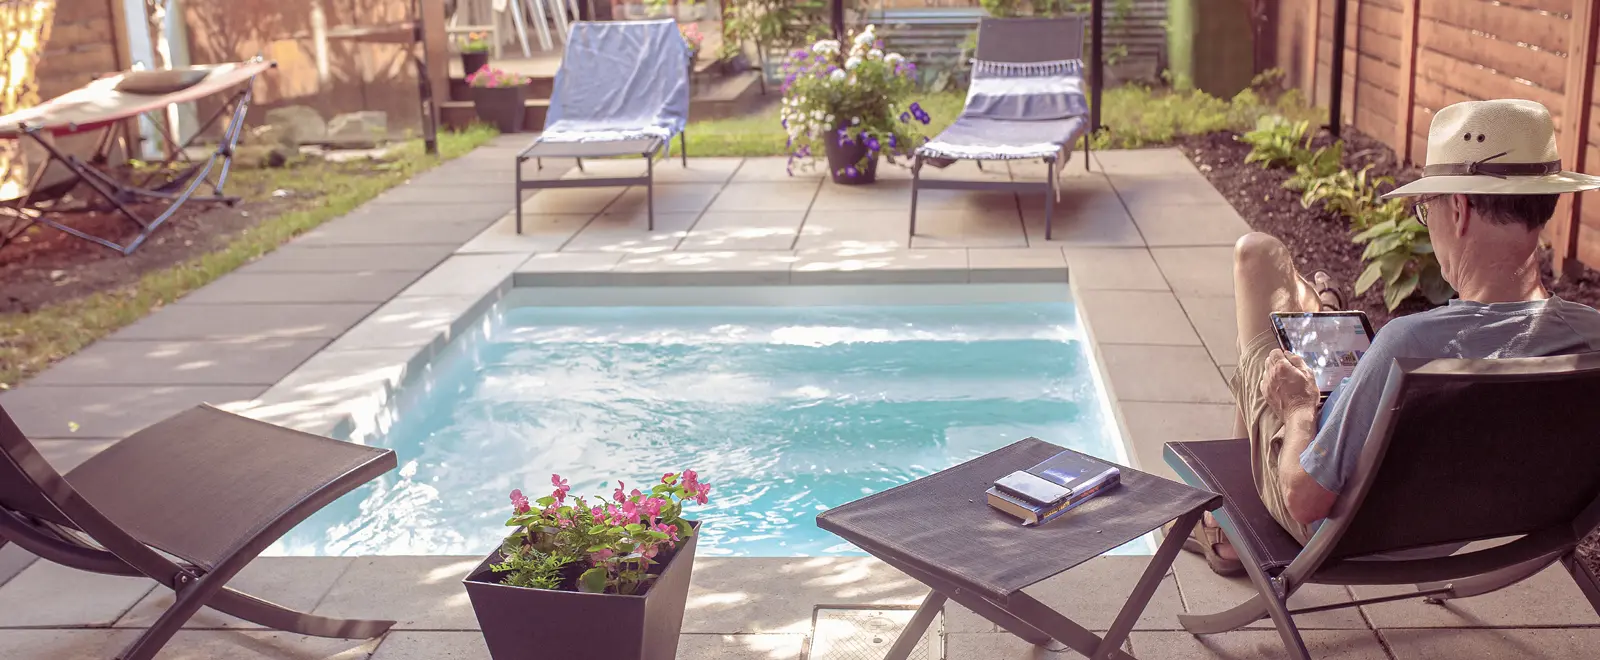 Leisure Pools warranty and service